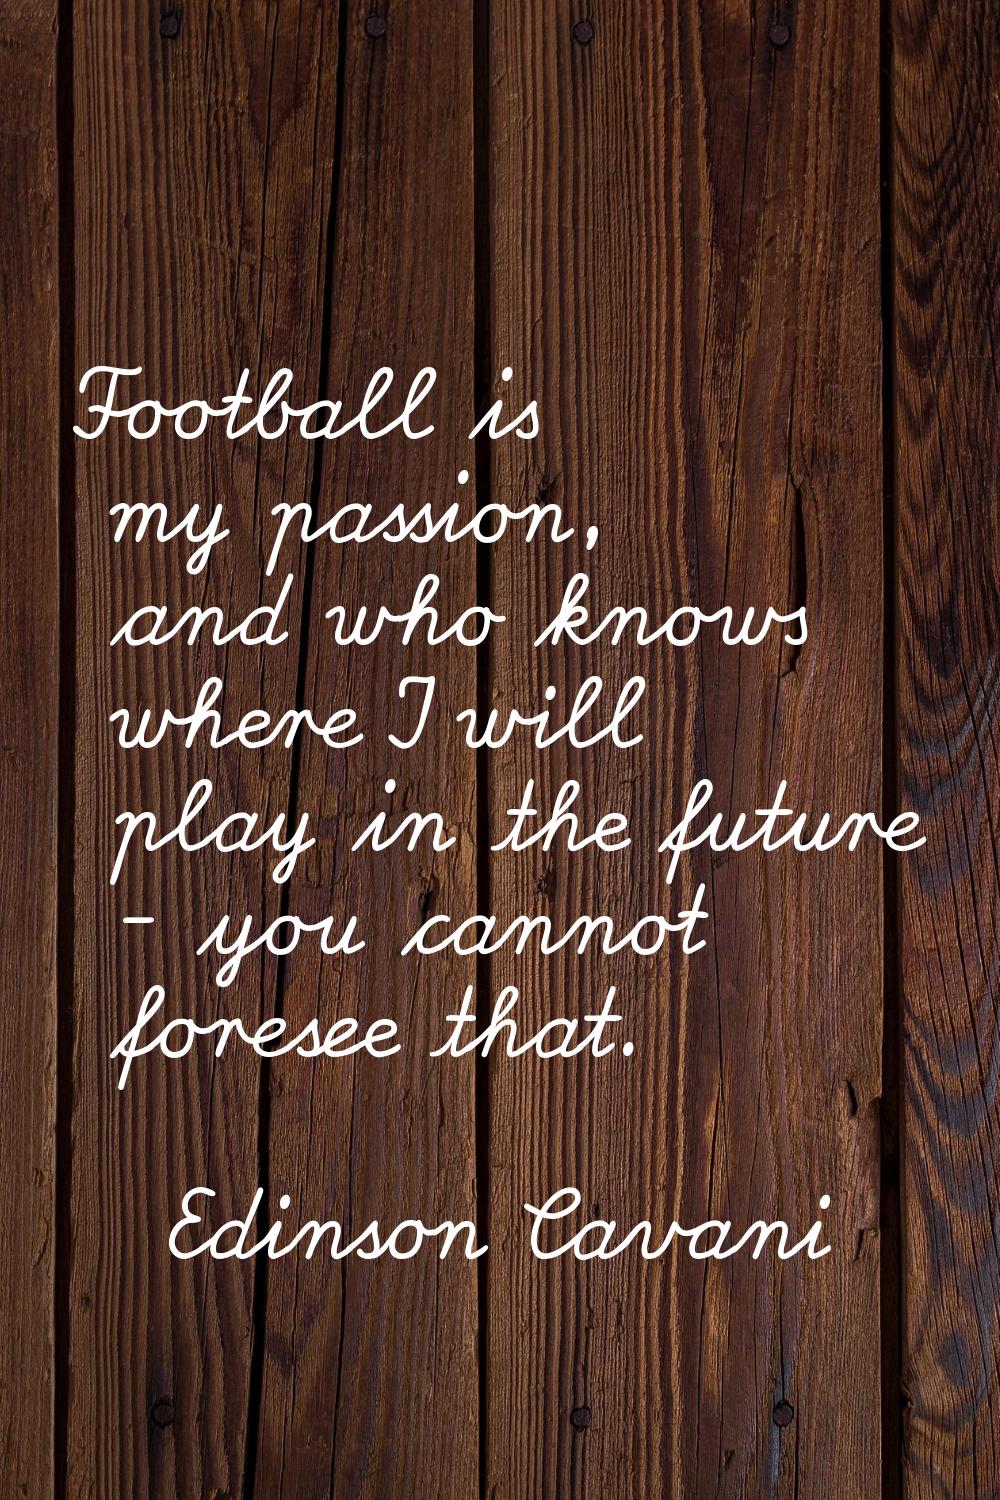 Football is my passion, and who knows where I will play in the future - you cannot foresee that.